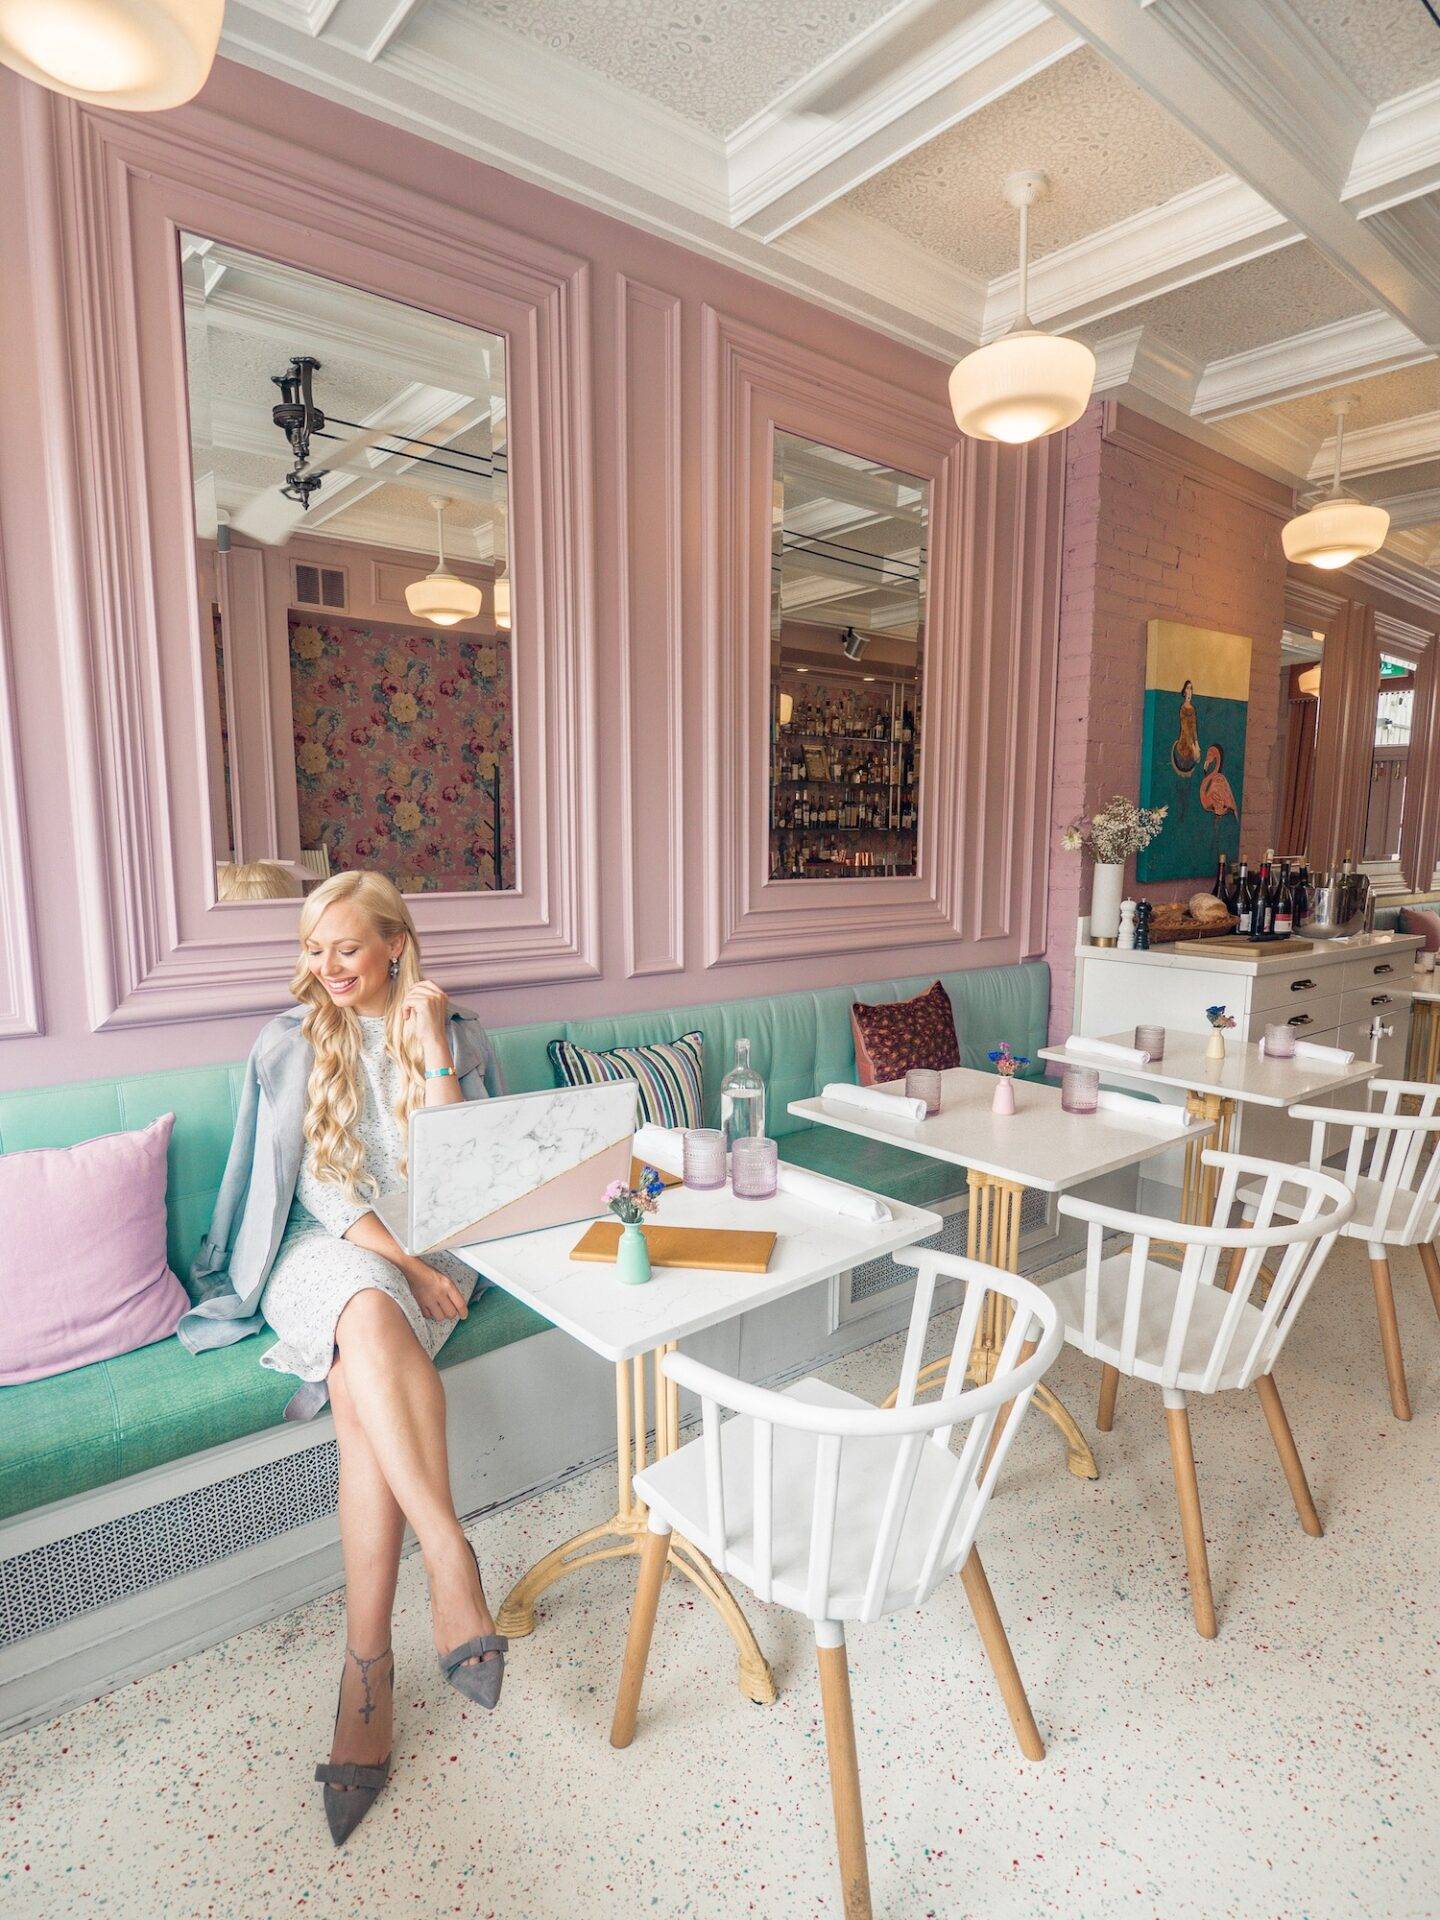 On the hunt for the prettiest and most instagrammable pink places in Toronto? Look no further. As a native to Toronto and a certified pink lover myself I've put together this list of all the places you won't want to miss. This post has all the hottest pink spots in Toronto from restaurants, to pink walls, ice cream parlours and more. If you're a lover of pink you won't want to miss checking out this list of pink Toronto spots.